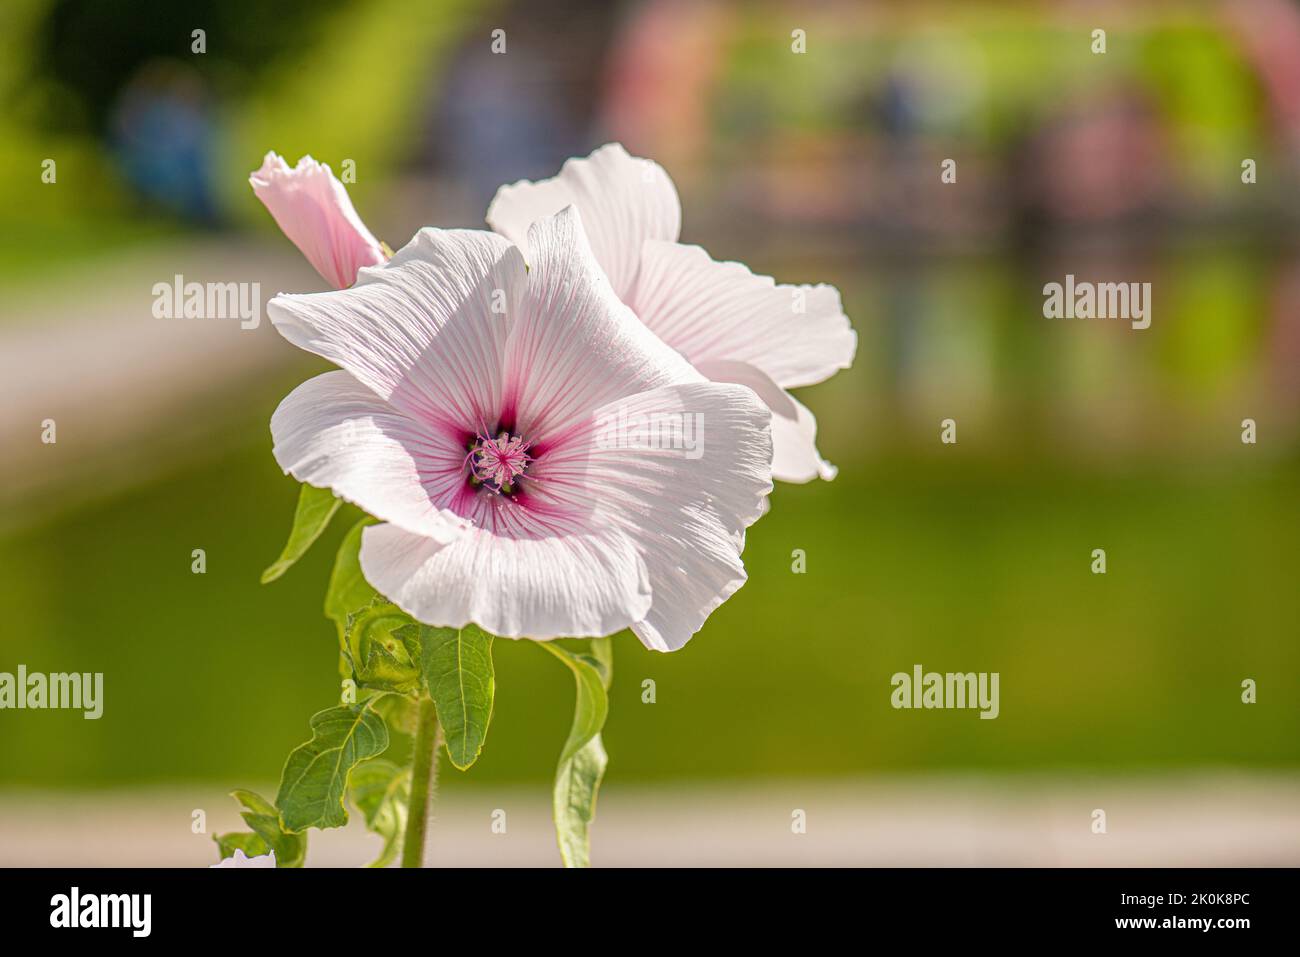 a pink lavatera isolated on a blurred green background Stock Photo